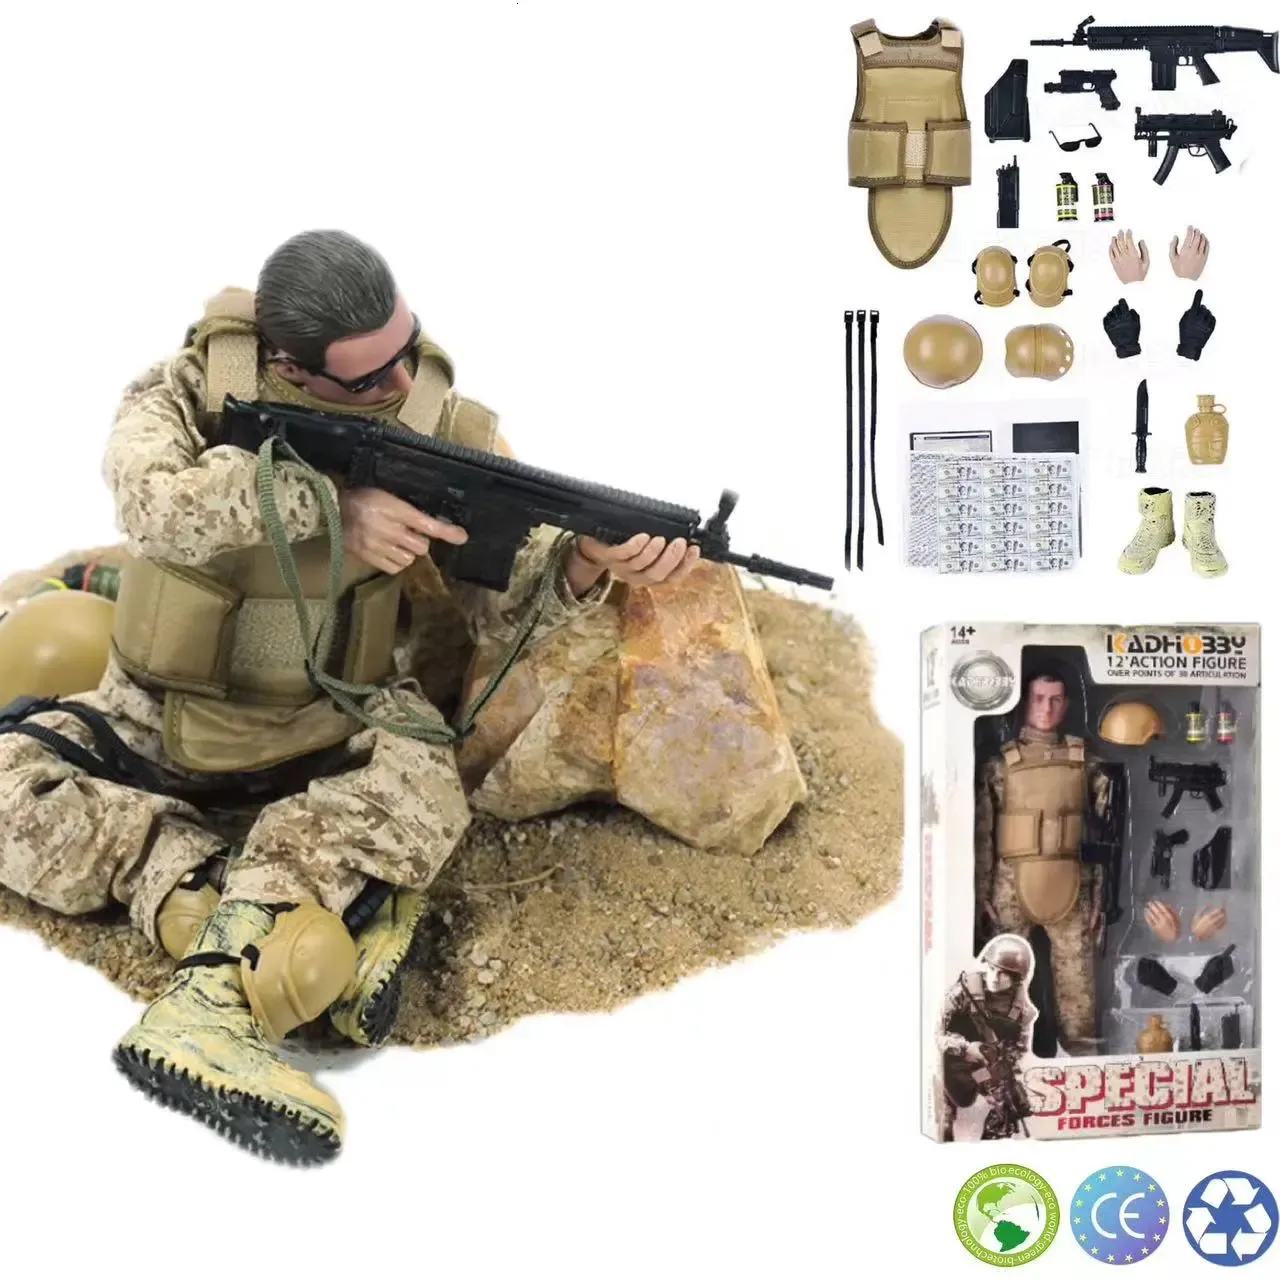 Military Figures 12''Navy Seals American Soldiers Special Forces Army Man Action Play Set Digital Desert Camouflage 230928